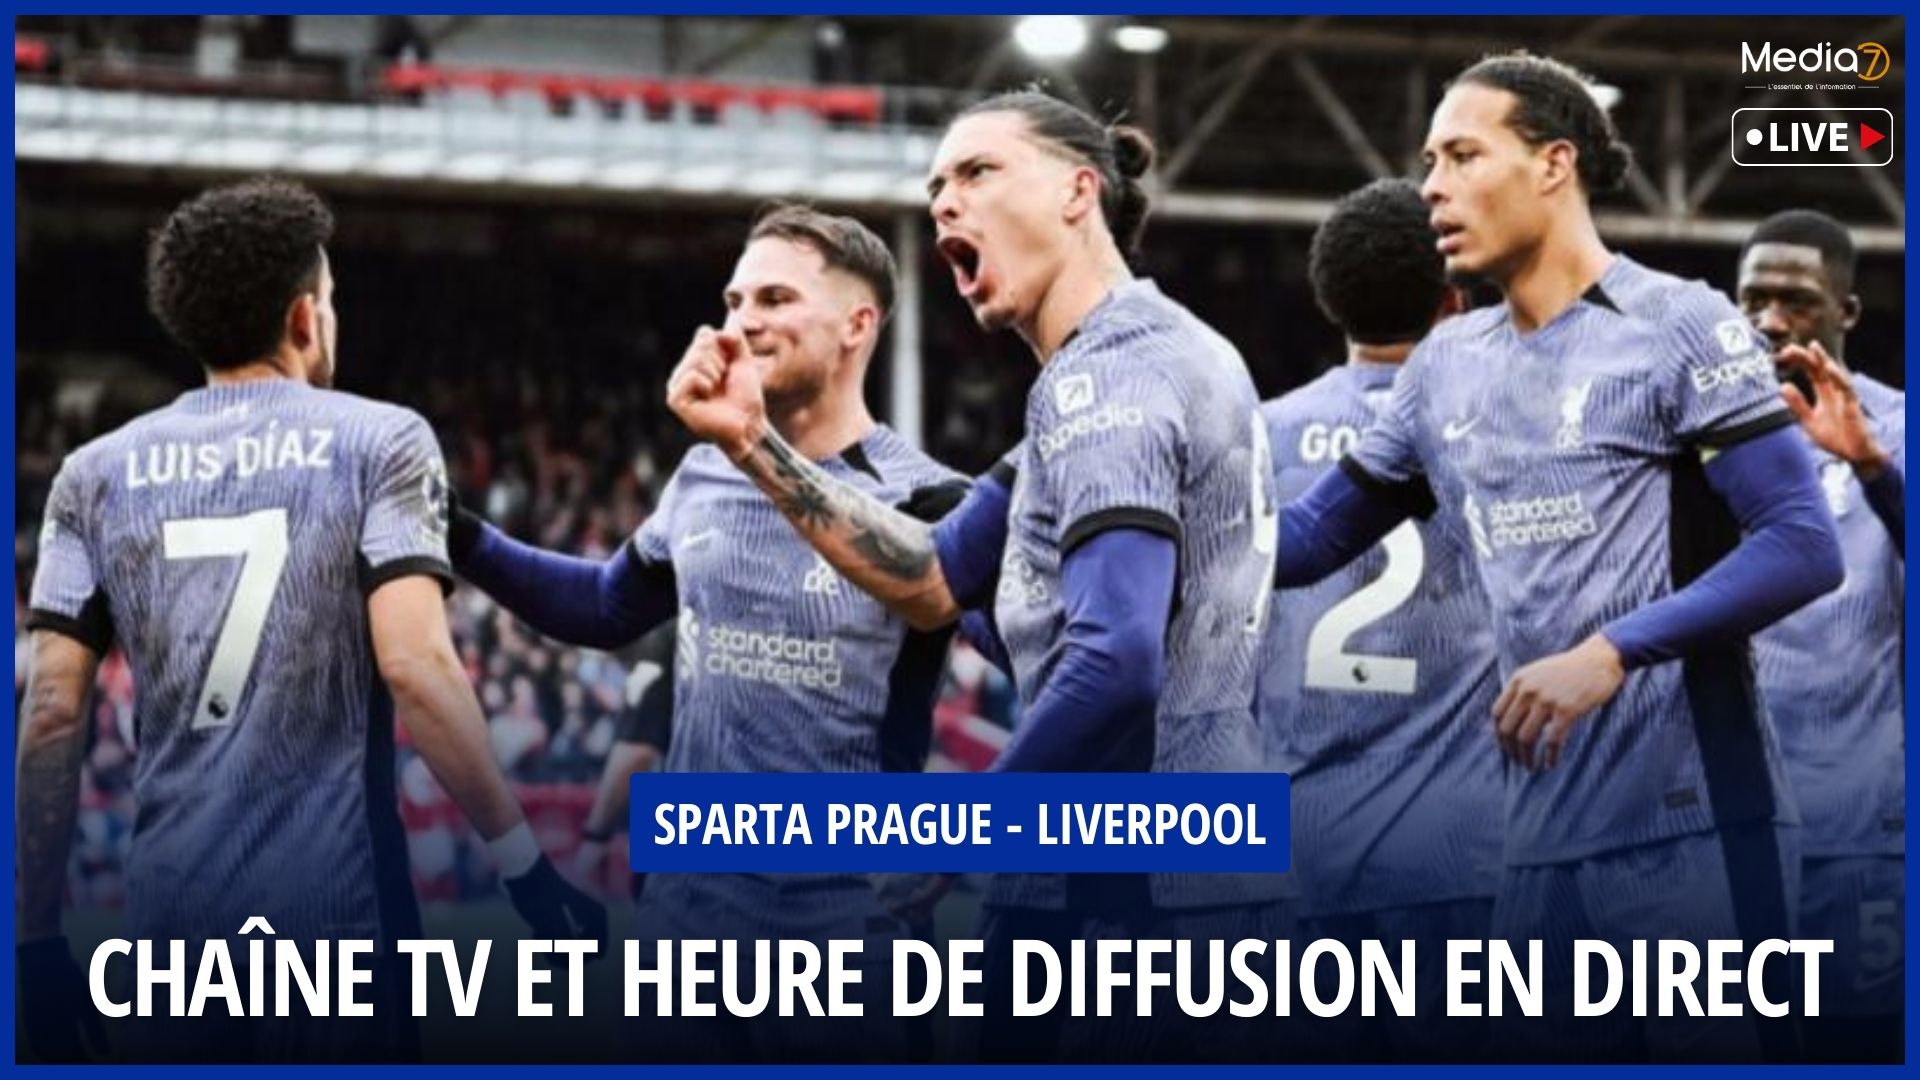 Sparta Prague - Liverpool match live: TV channel and broadcast time - Media7